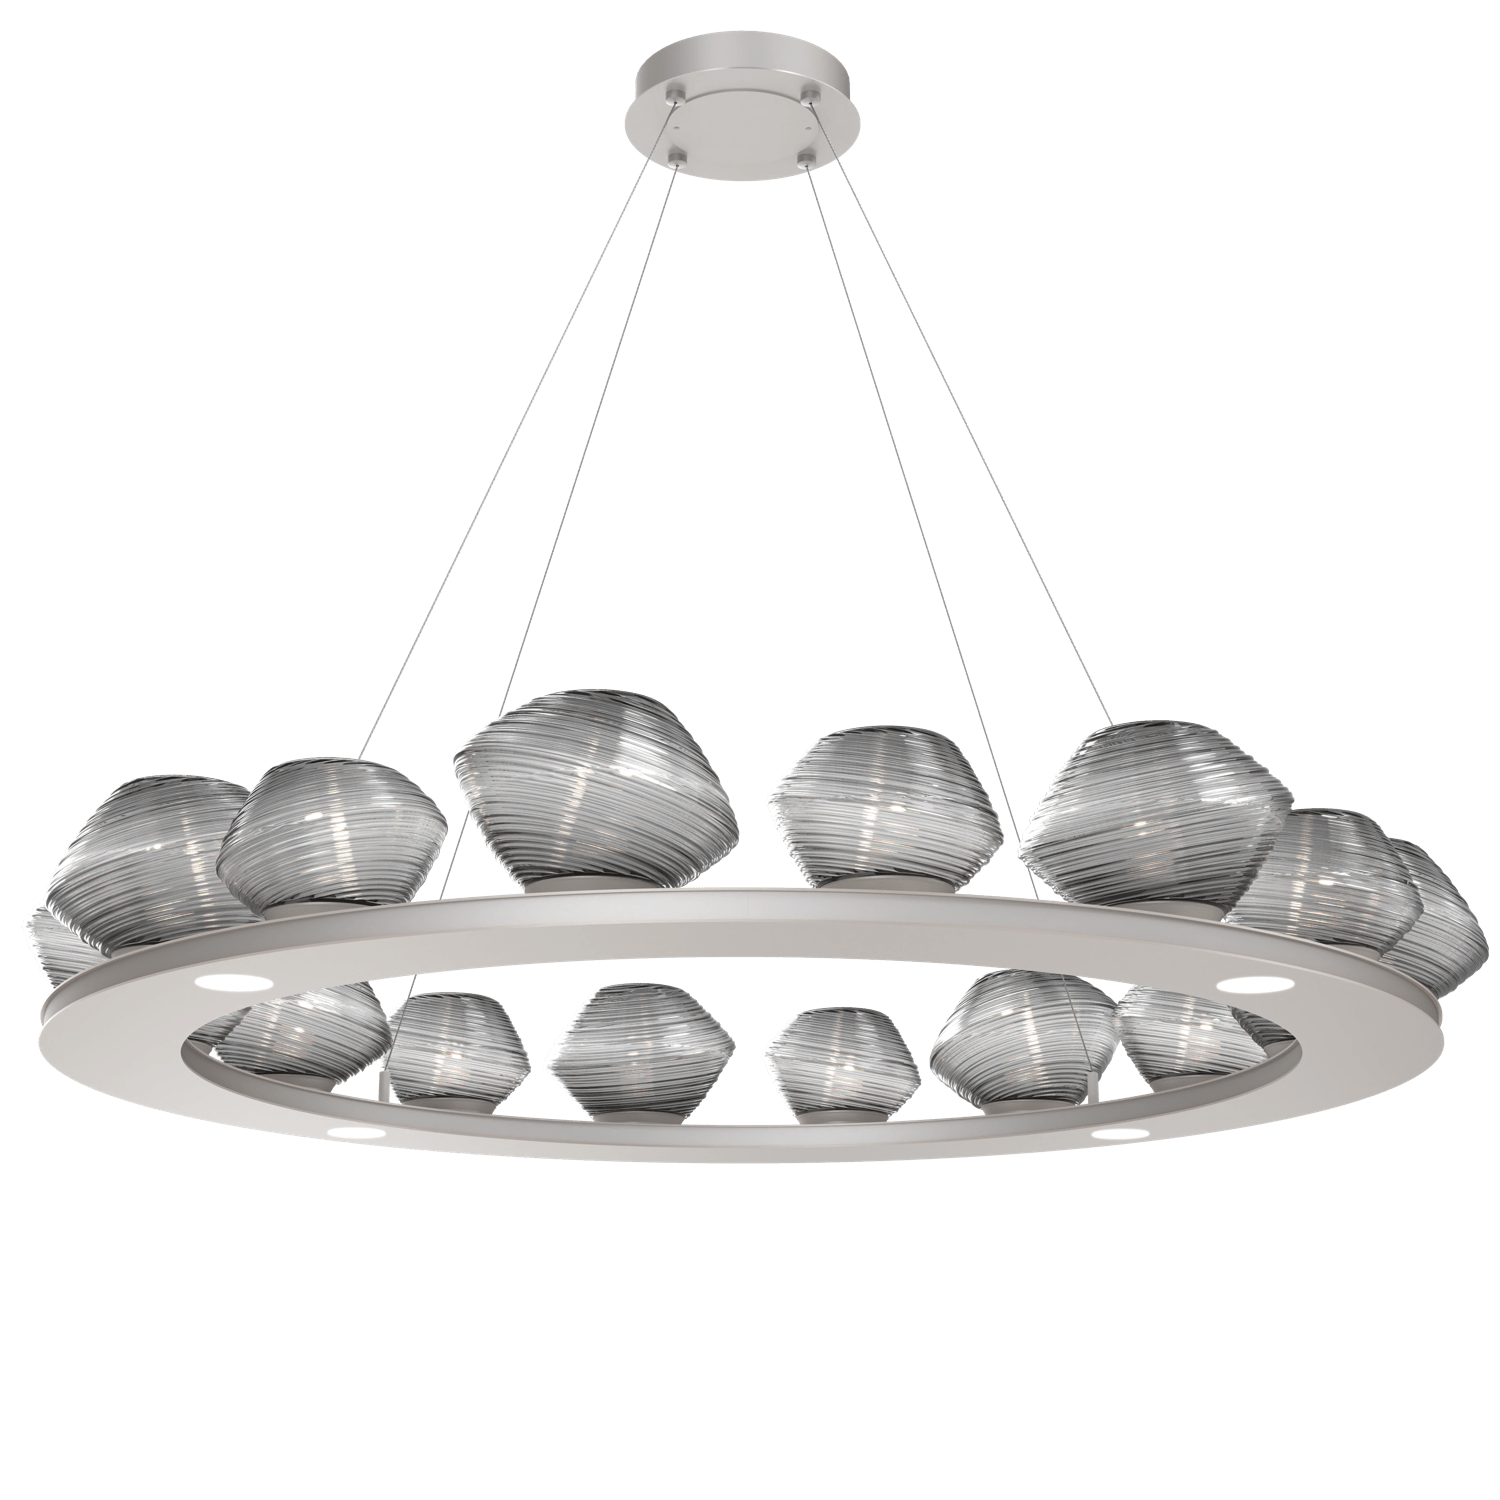 CHB0089-0D-BS-S-Hammerton-Studio-Mesa-48-inch-ring-chandelier-with-metallic-beige-silver-finish-and-smoke-blown-glass-shades-and-LED-lamping